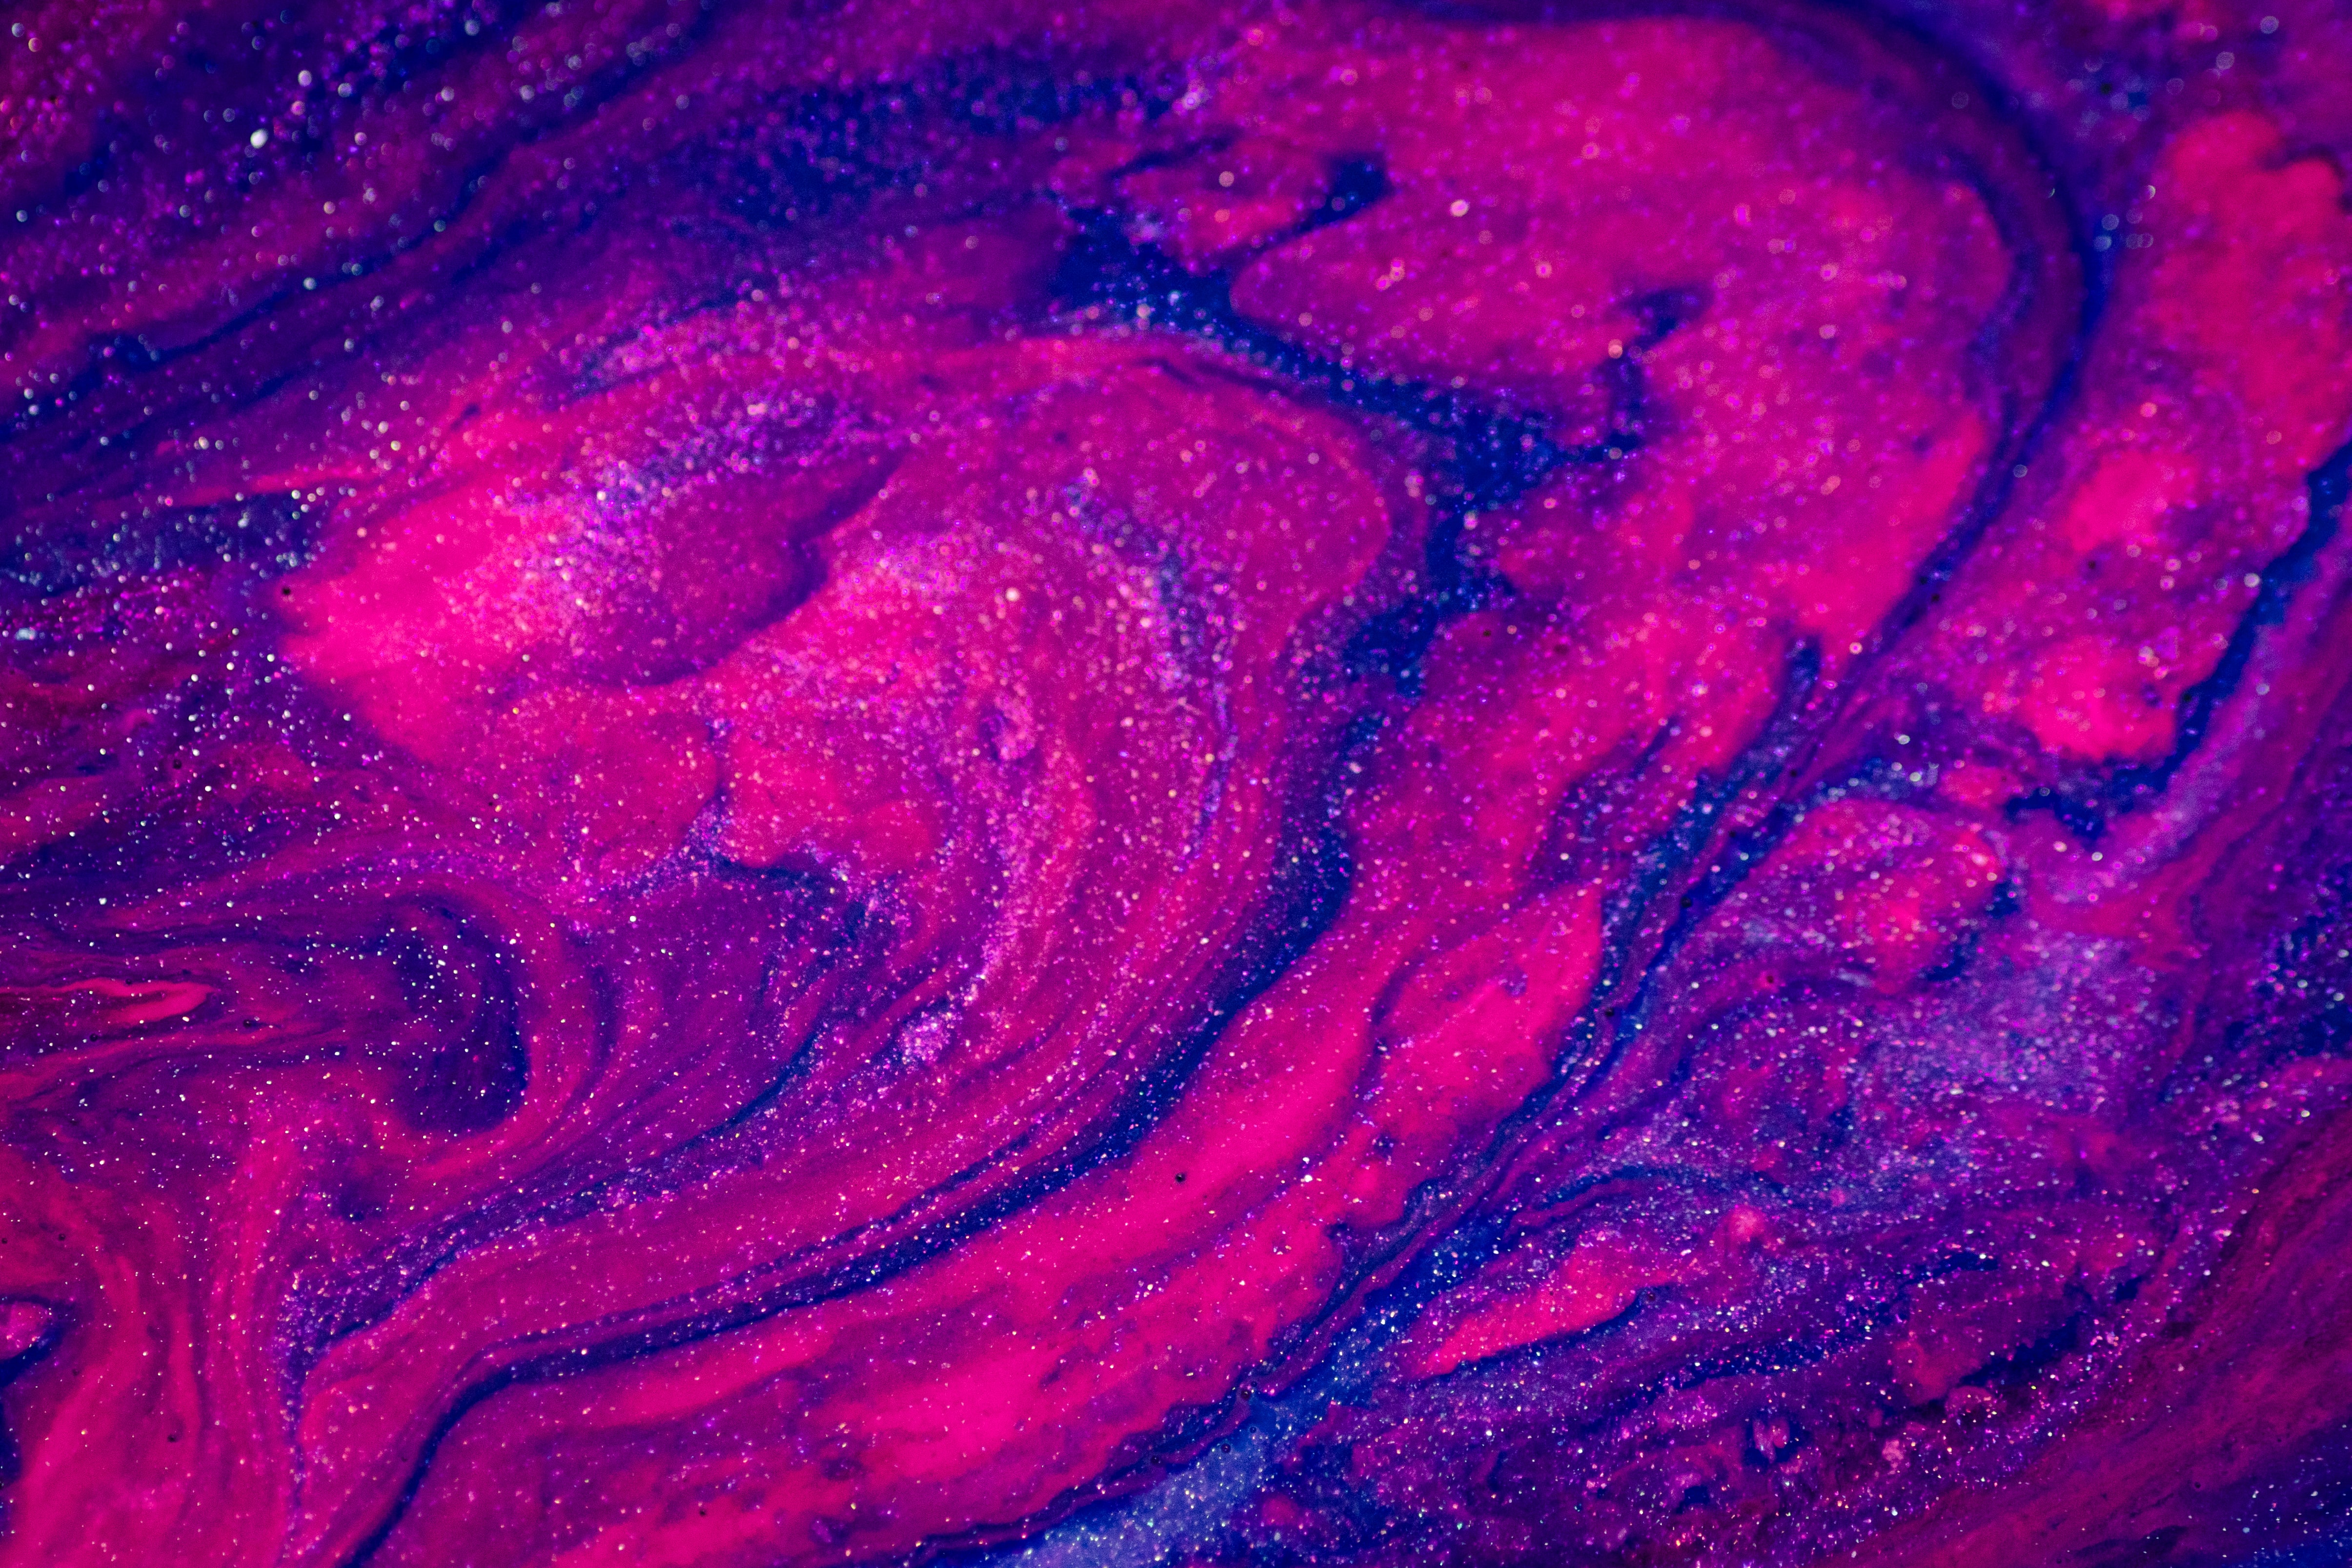 Photo of a purple and pink glittery mess of paint, resembling something celestial.